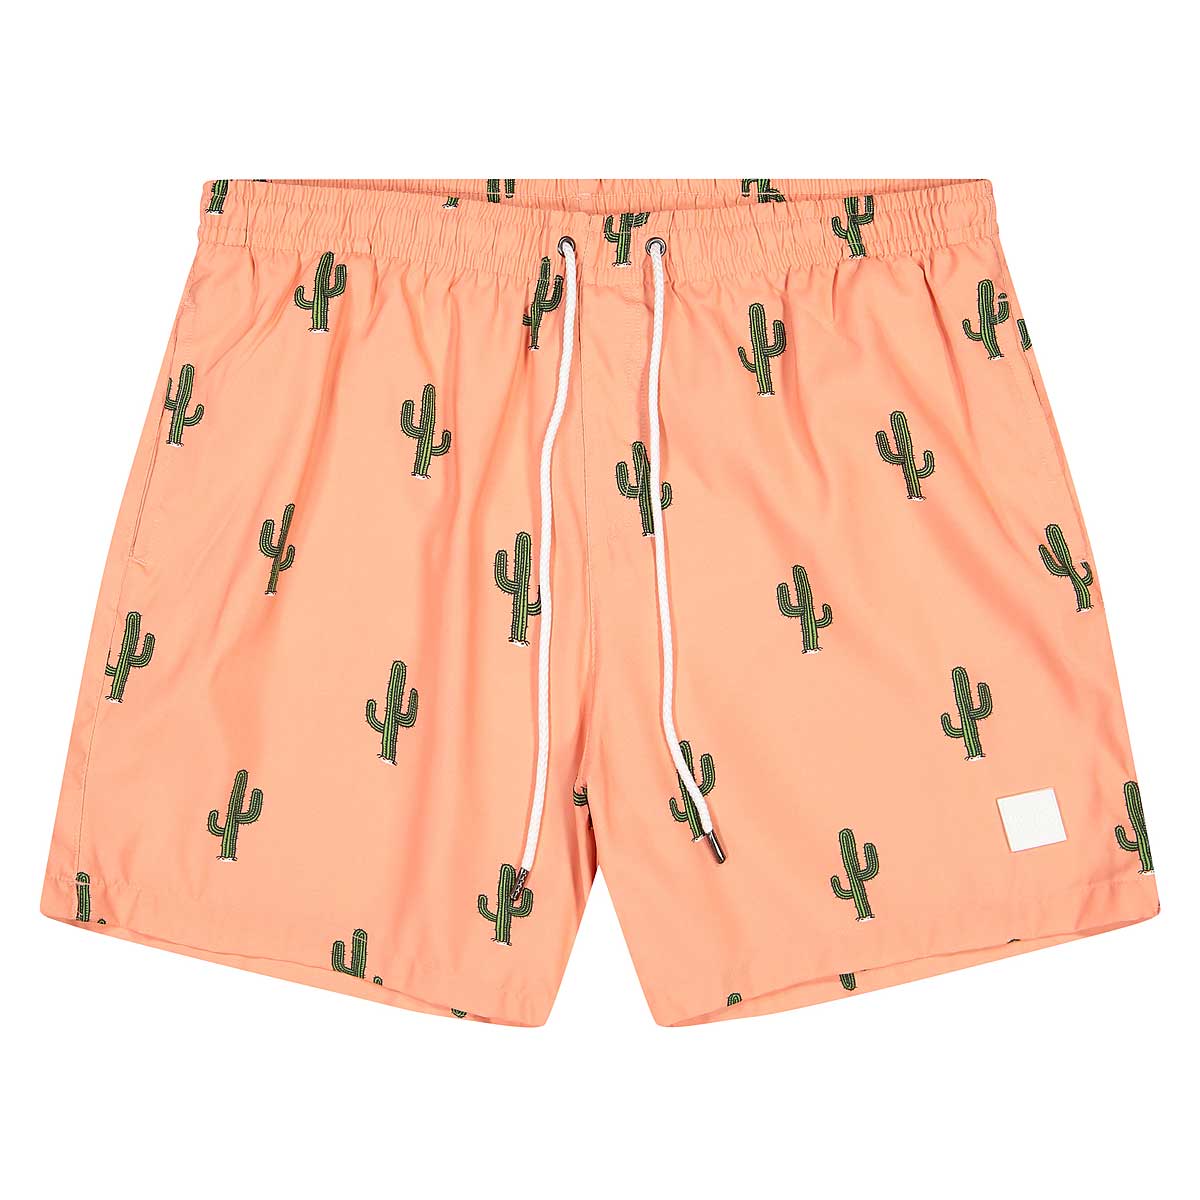 Cactus Pattern Swim Shorts For Women  Men Perfect Couple Gift Cactus Shorts Plant Print Swimsuit Cute His & Hers MultiSport Shorts